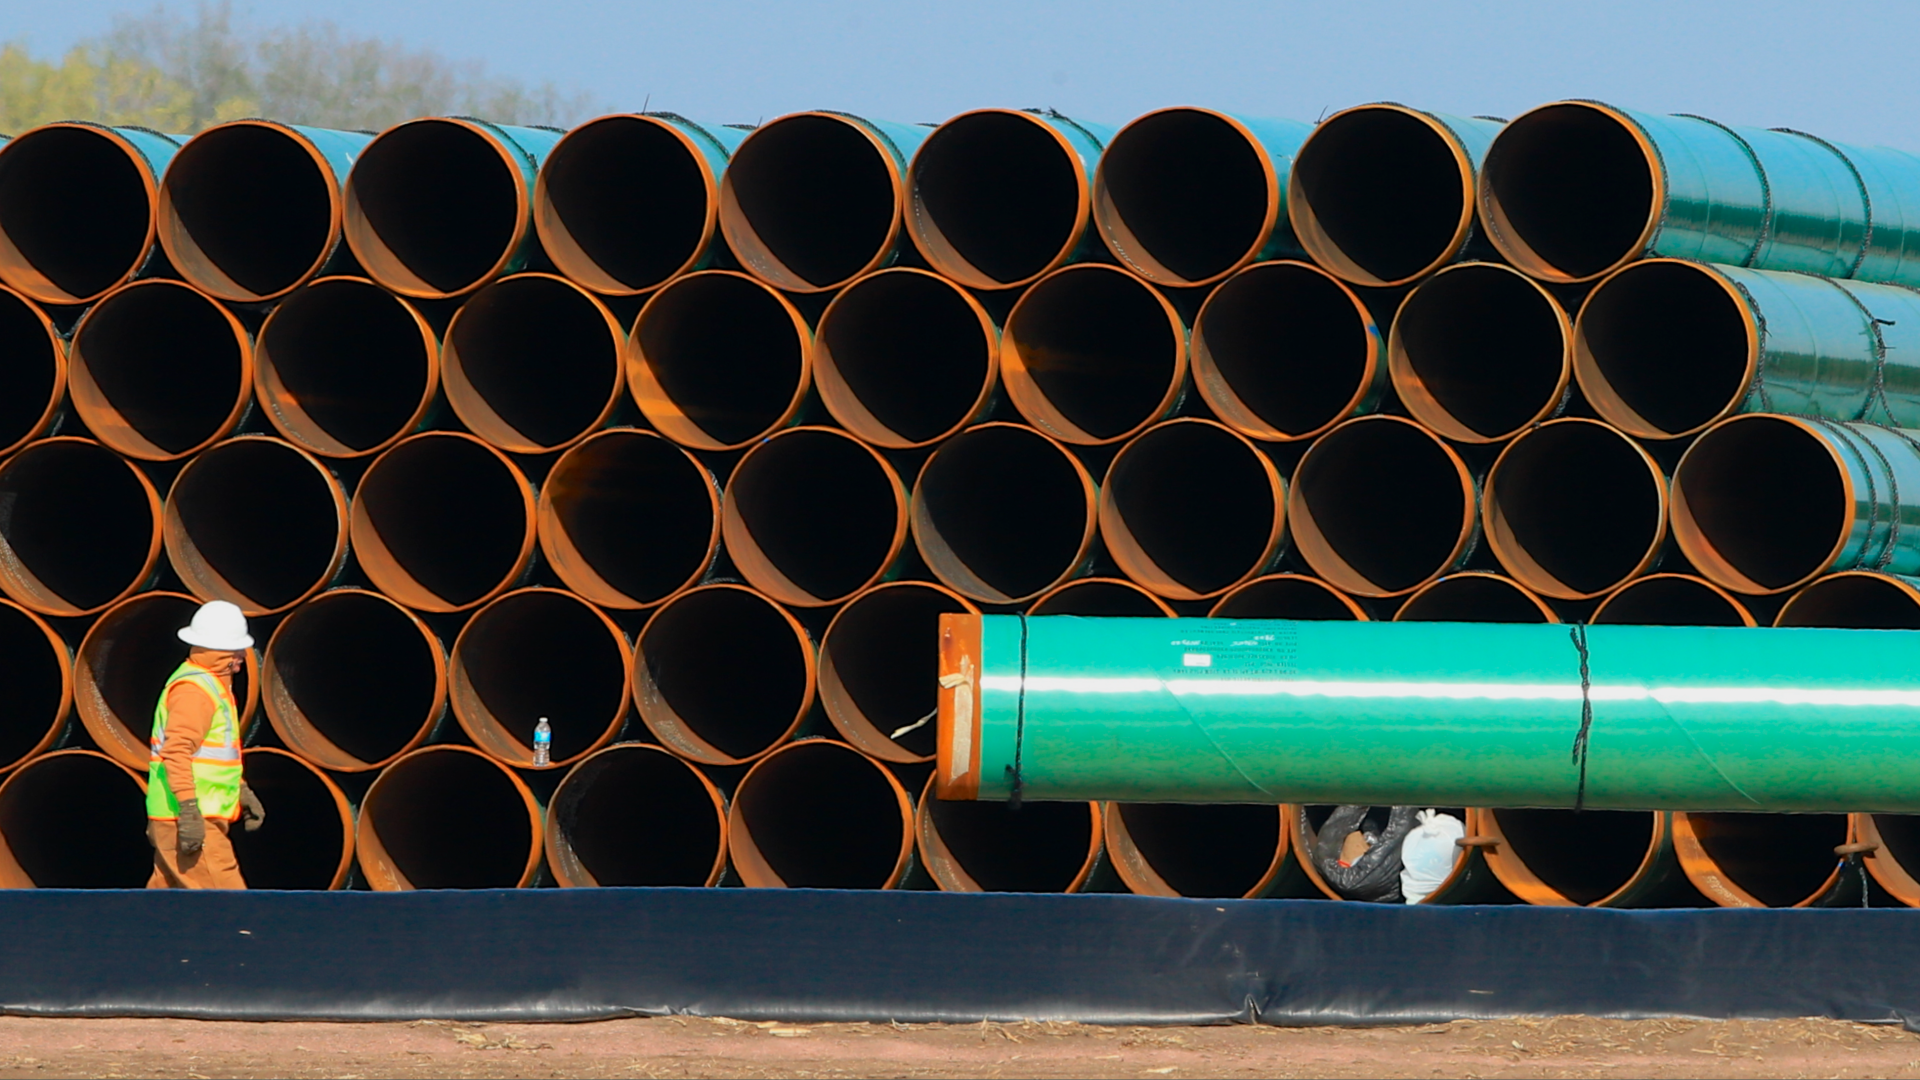 A photo of pipes.